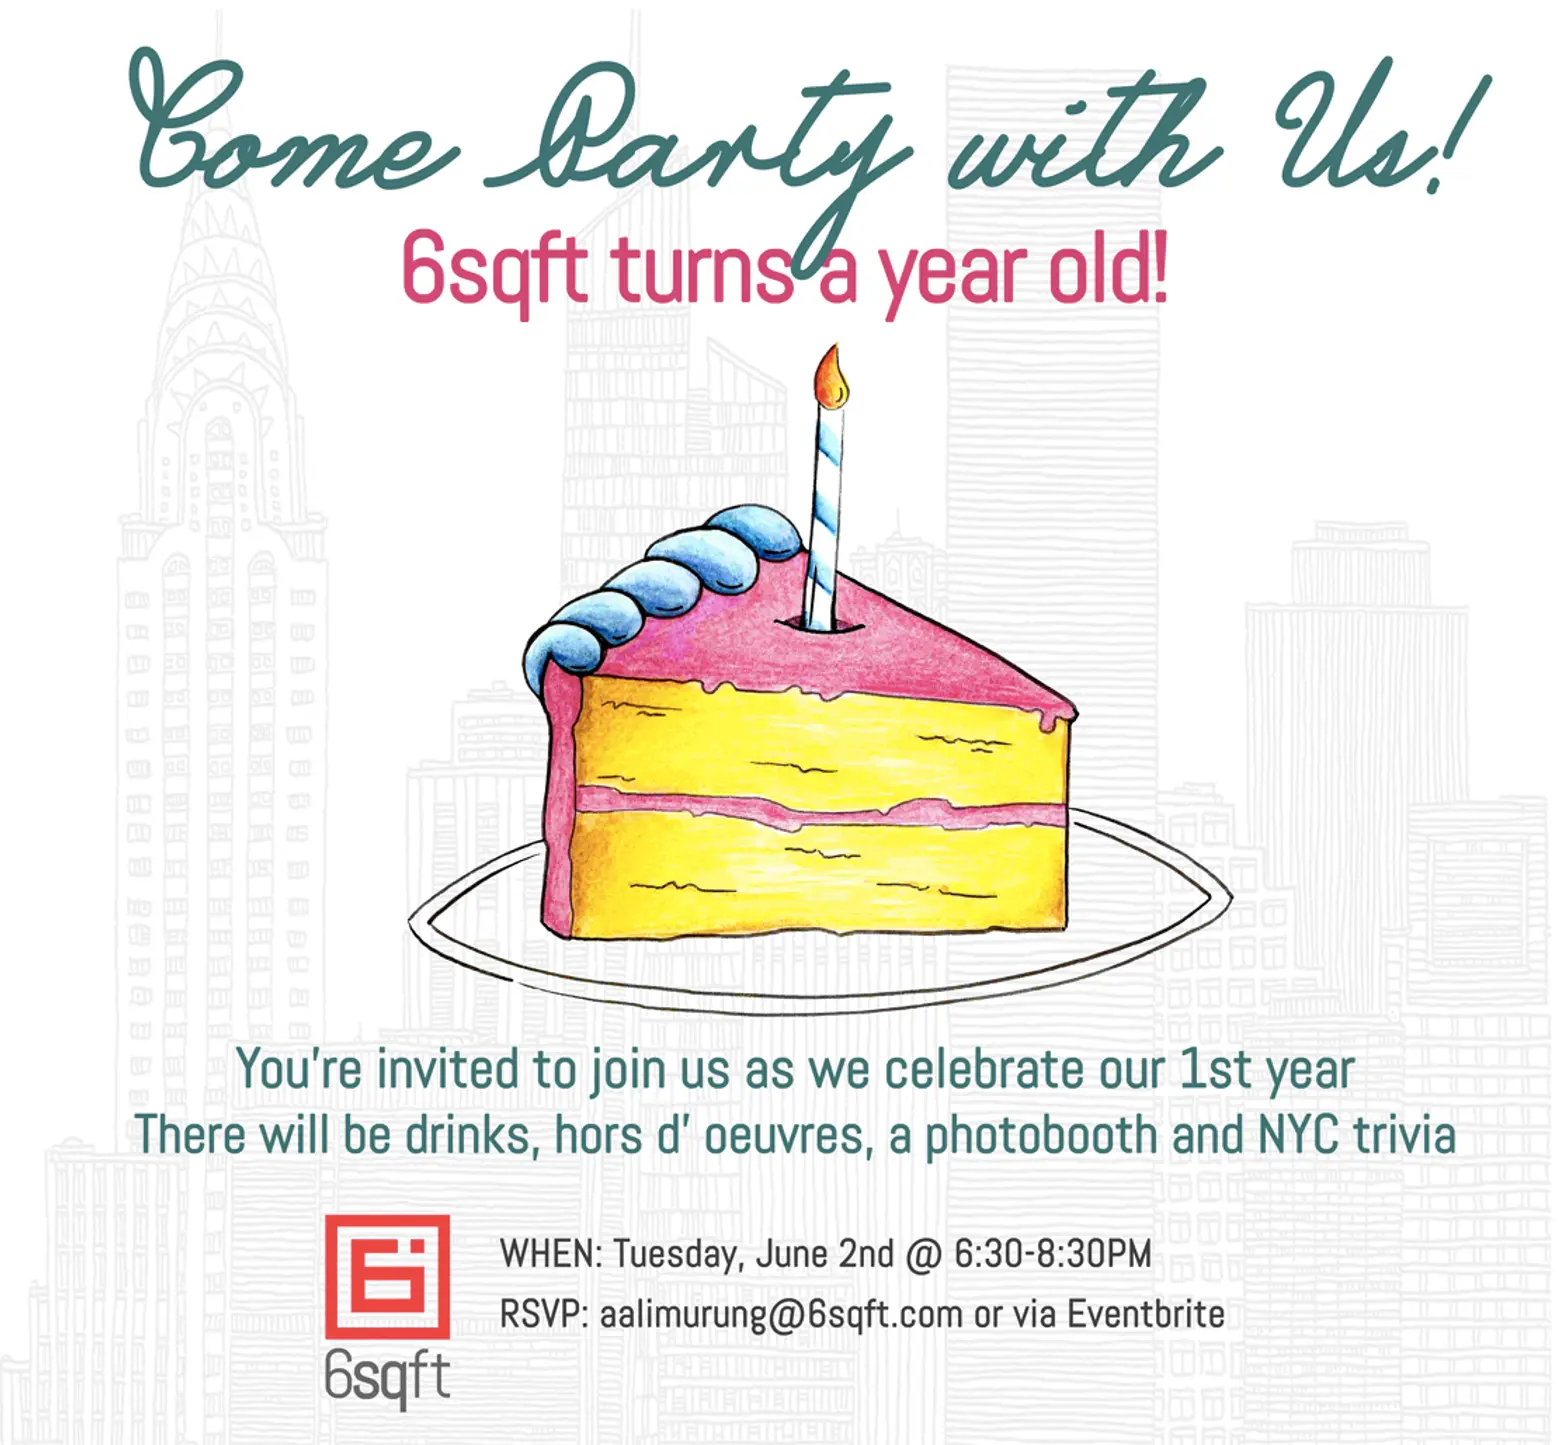 YOU’RE INVITED: Come Celebrate Our 1st Birthday with Us!